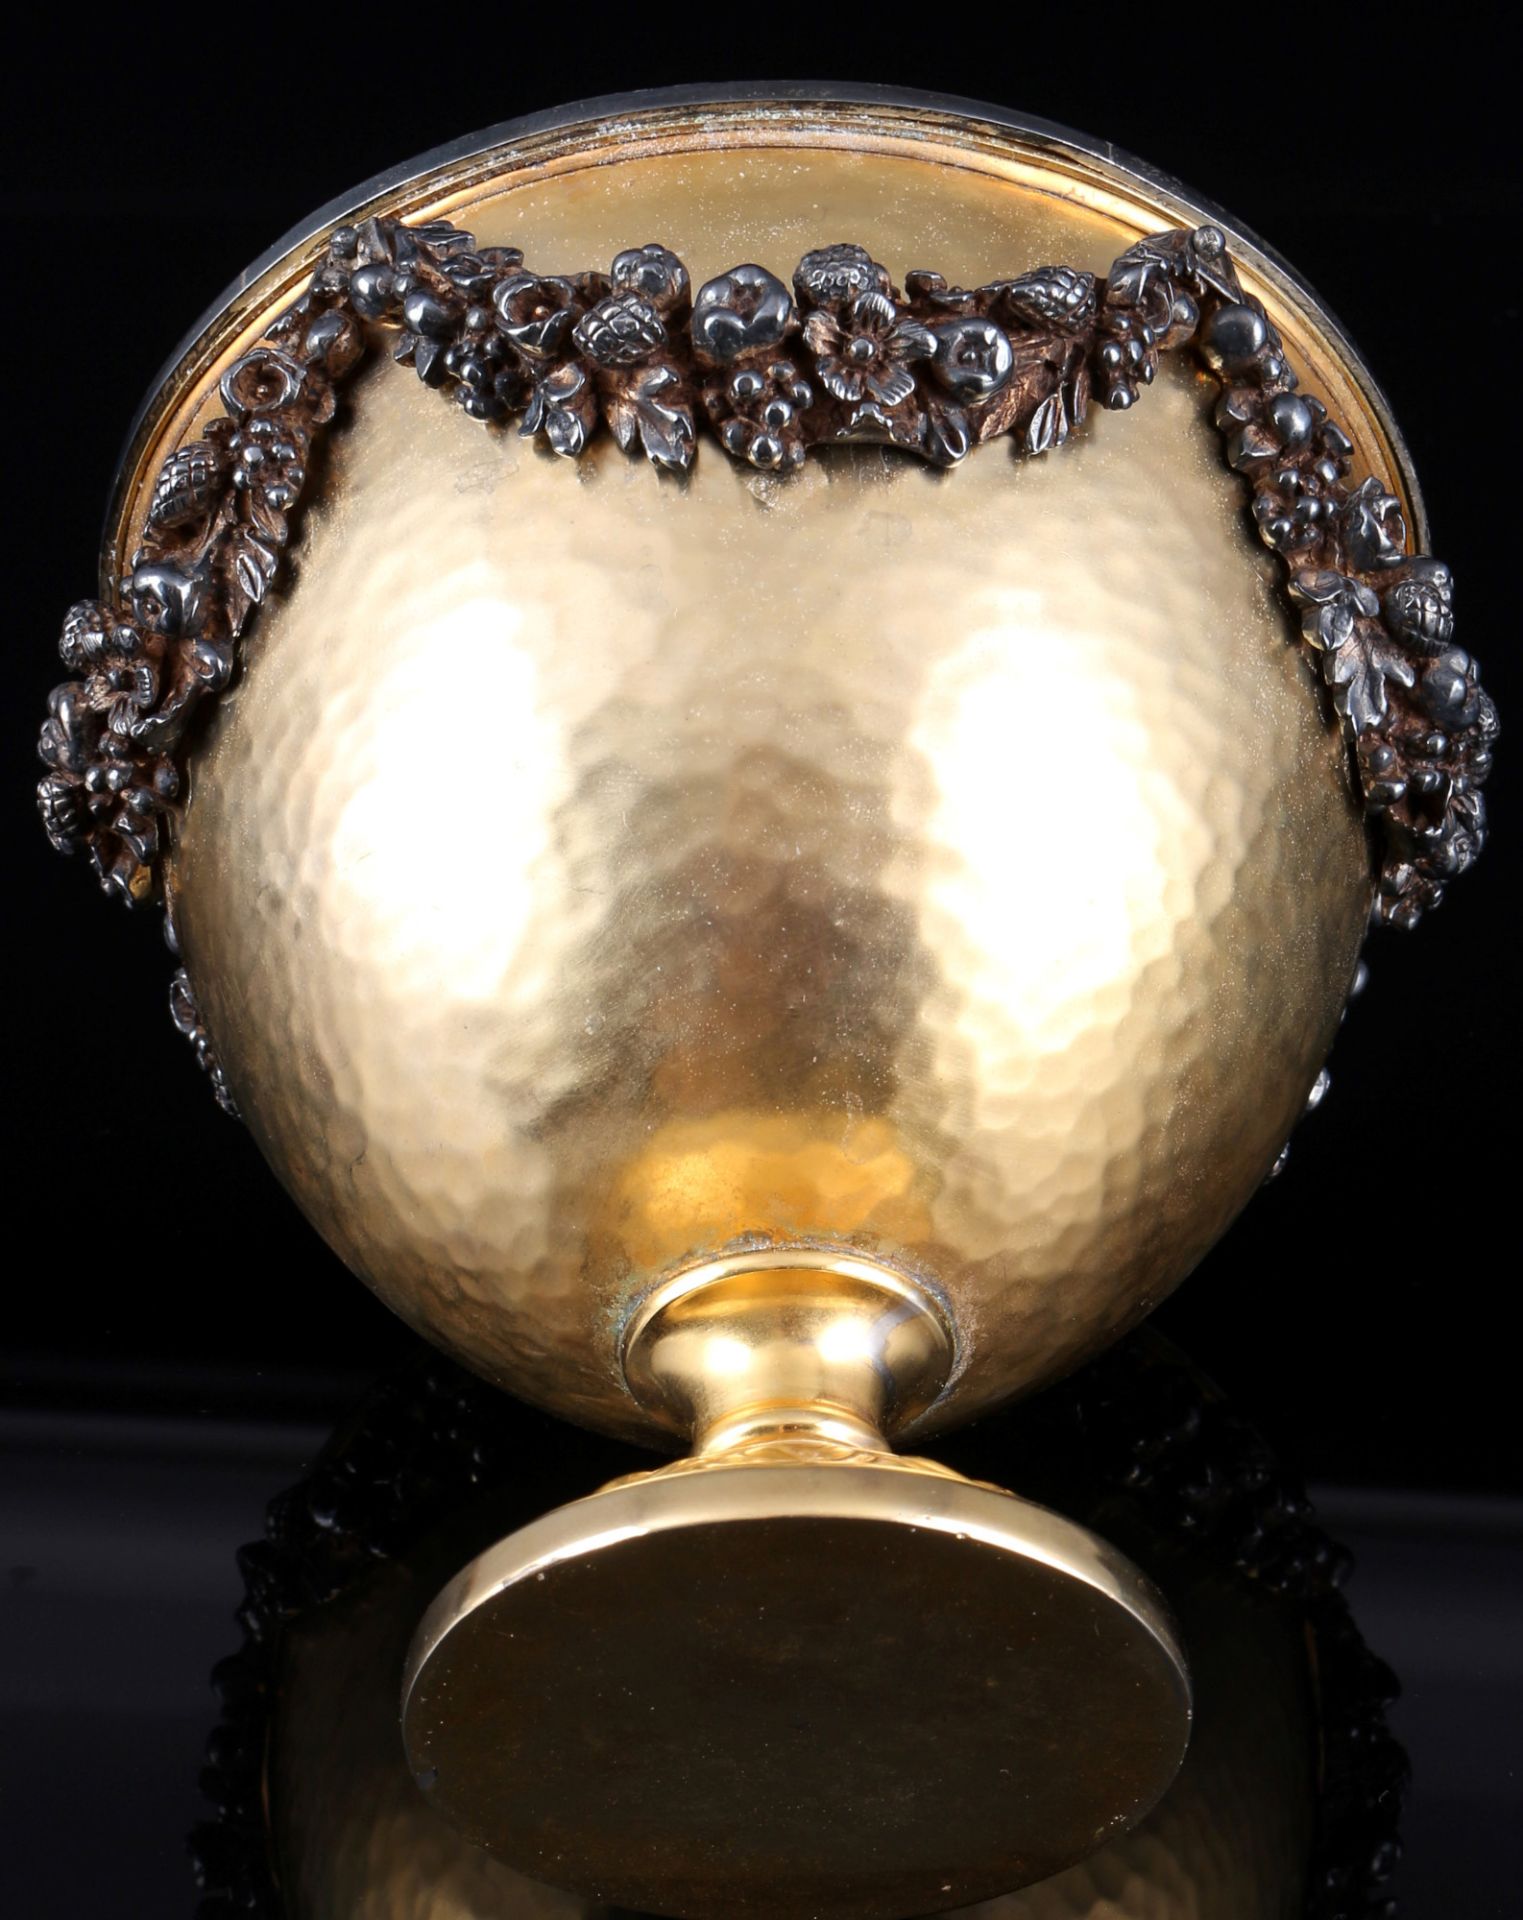 Ilias Lalaounis bronze goblet with 925 silver rim, Ilias Lalaounis Bronze Kelch mit 925 Silberrand, - Image 5 of 5